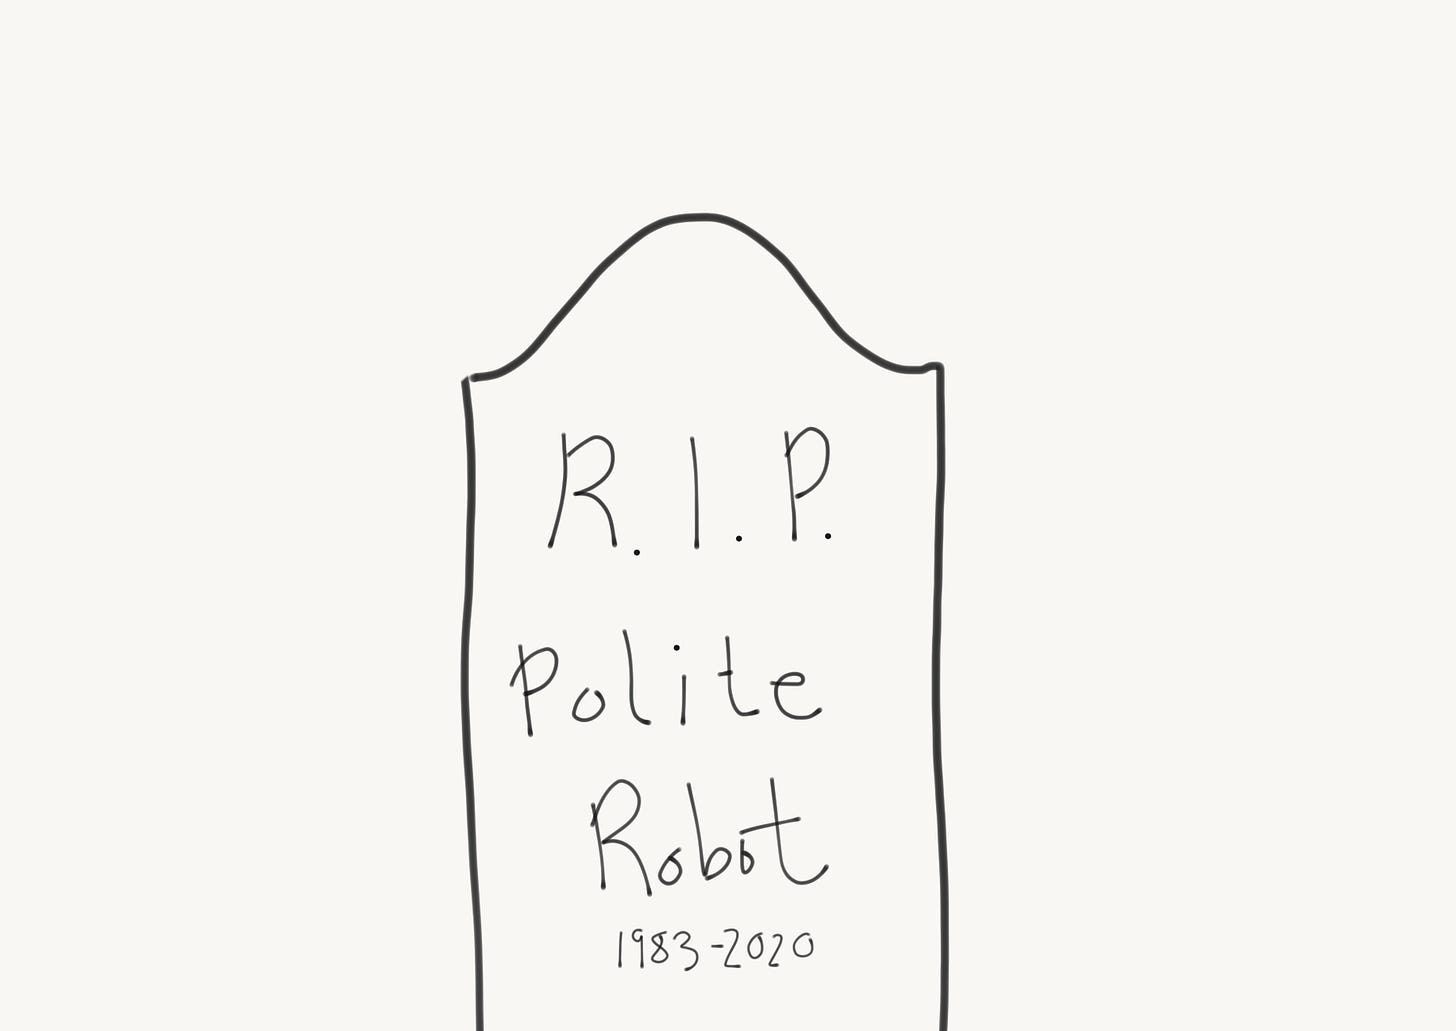 Grave stone inscribed with RIP Polite Robot 1983-2020.